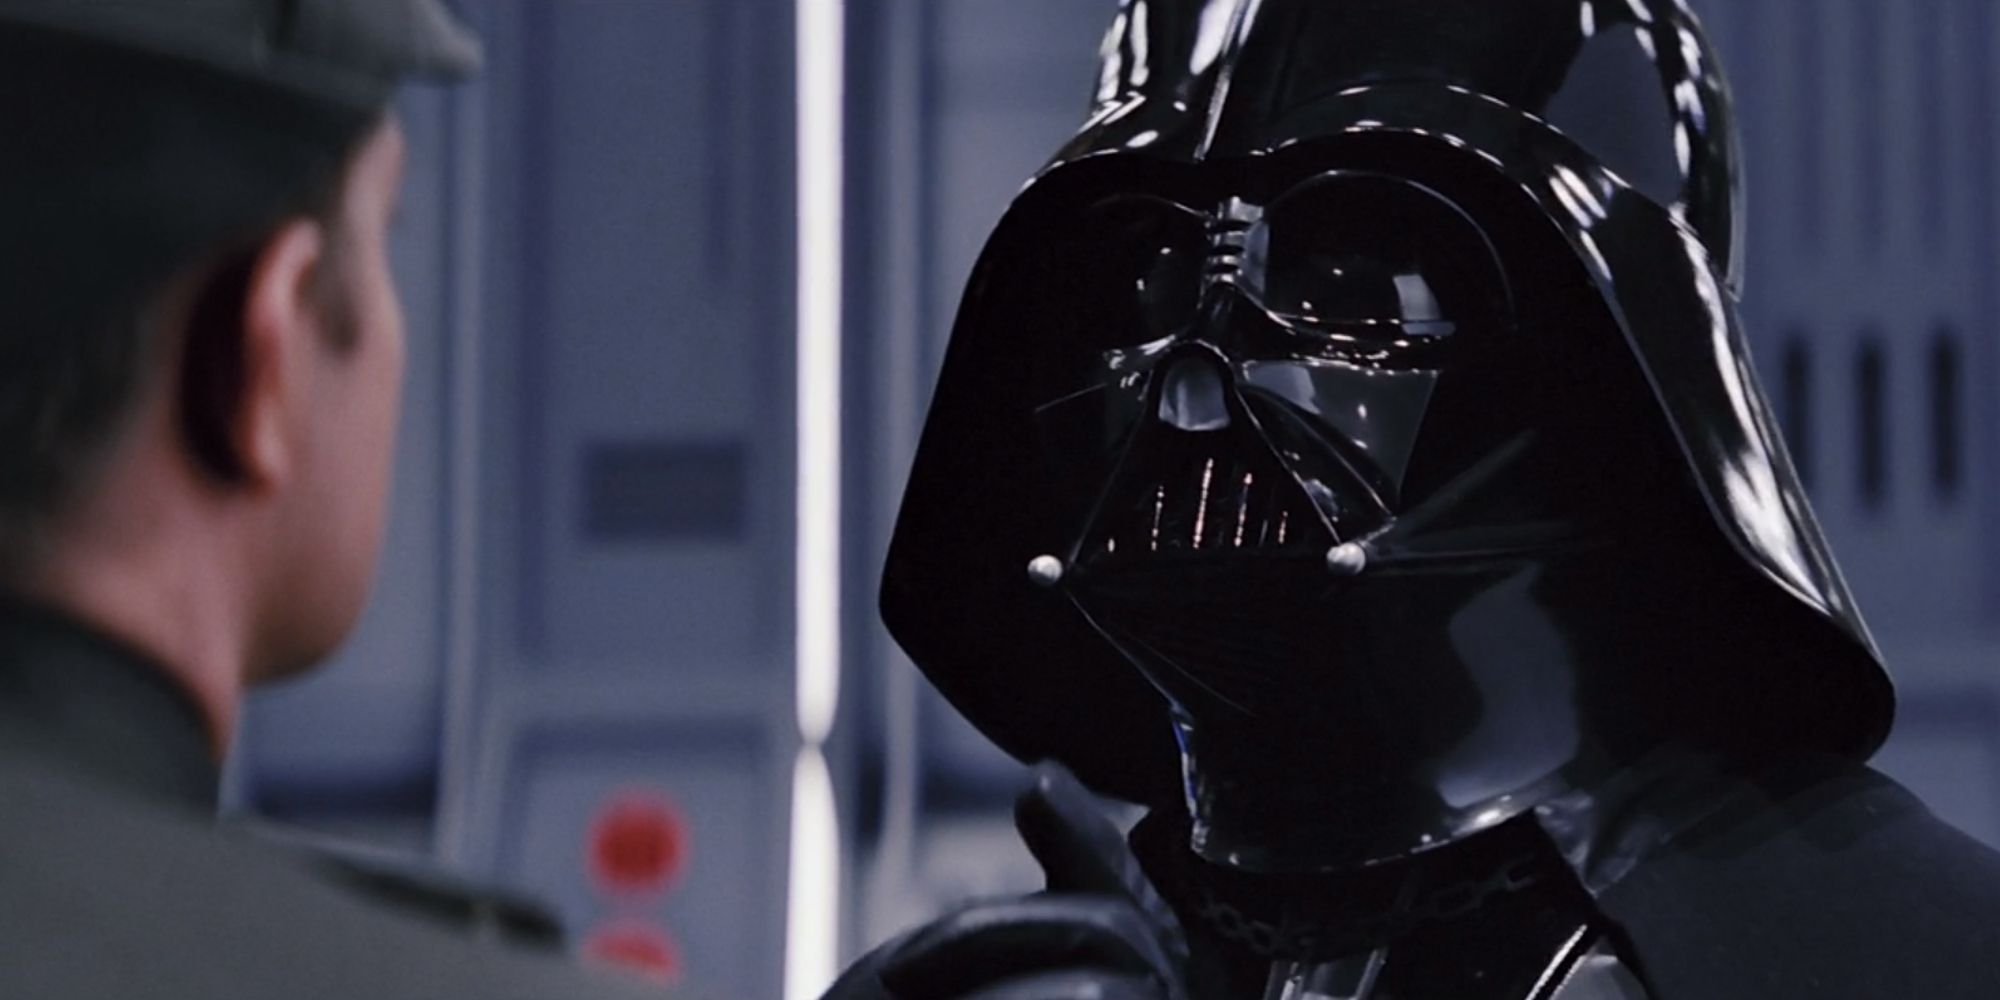 Darth Vader chastizing the commander aboard the Death Star II in Return Of The Jedi